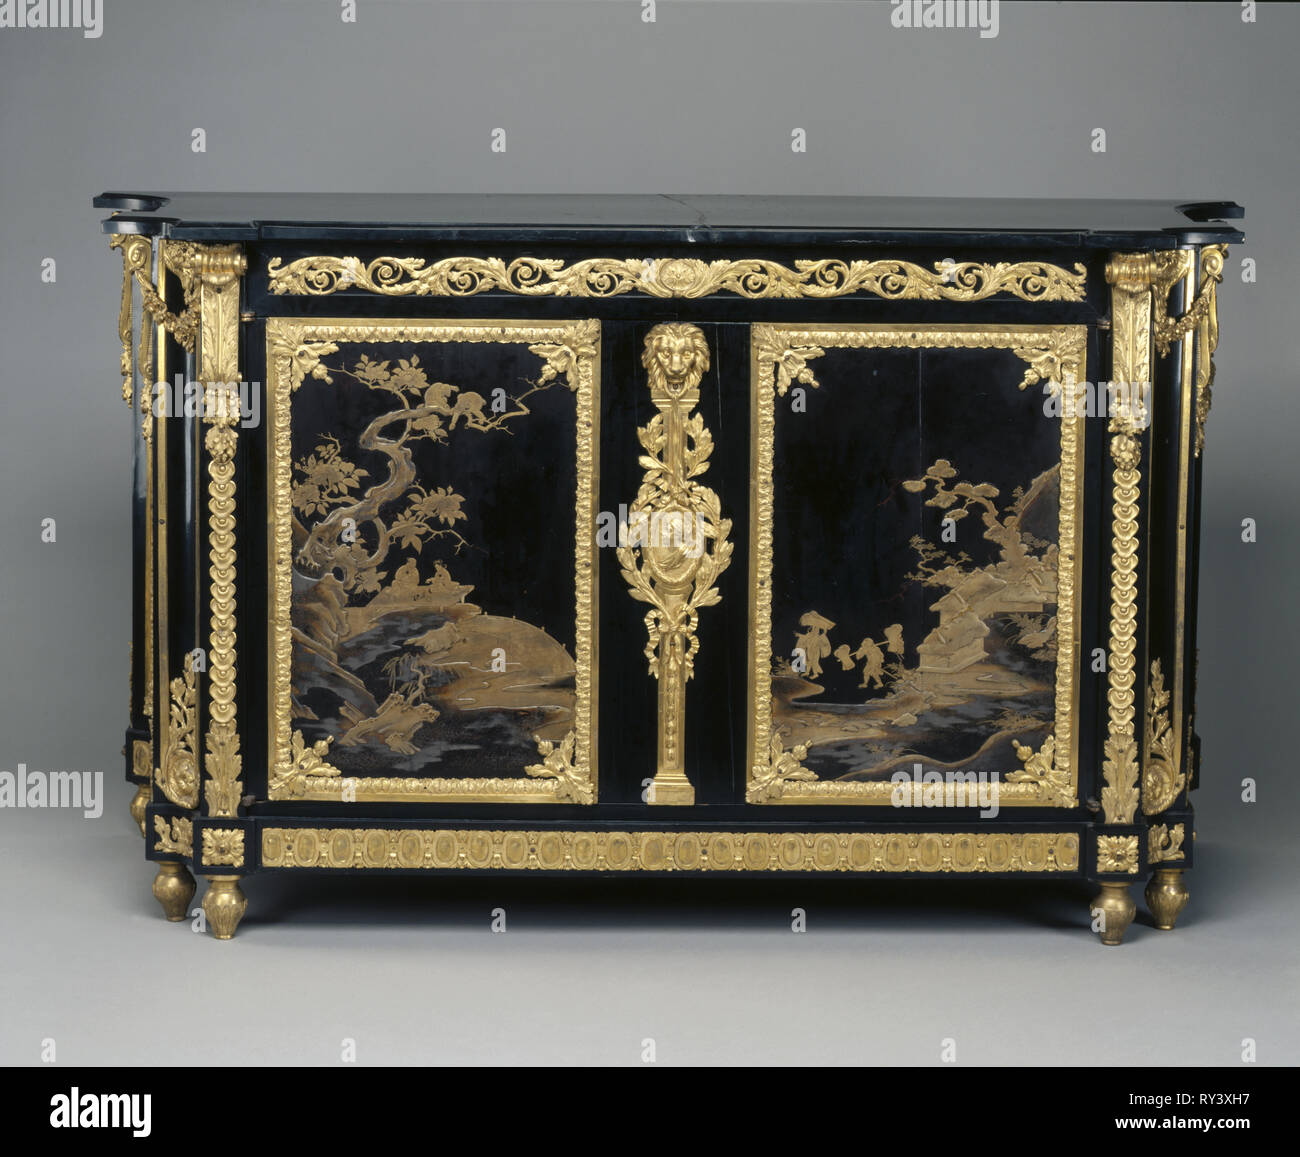 Chest of Drawers (Commode), c. 1765- 1770. René Dubois (French, 1737-1798). Ebony veneer with Japanese lacquer panels, gilt bronze mounts, and marble top; overall: 86.8 x 152.4 x 59.7 cm (34 3/16 x 60 x 23 1/2 in Stock Photo